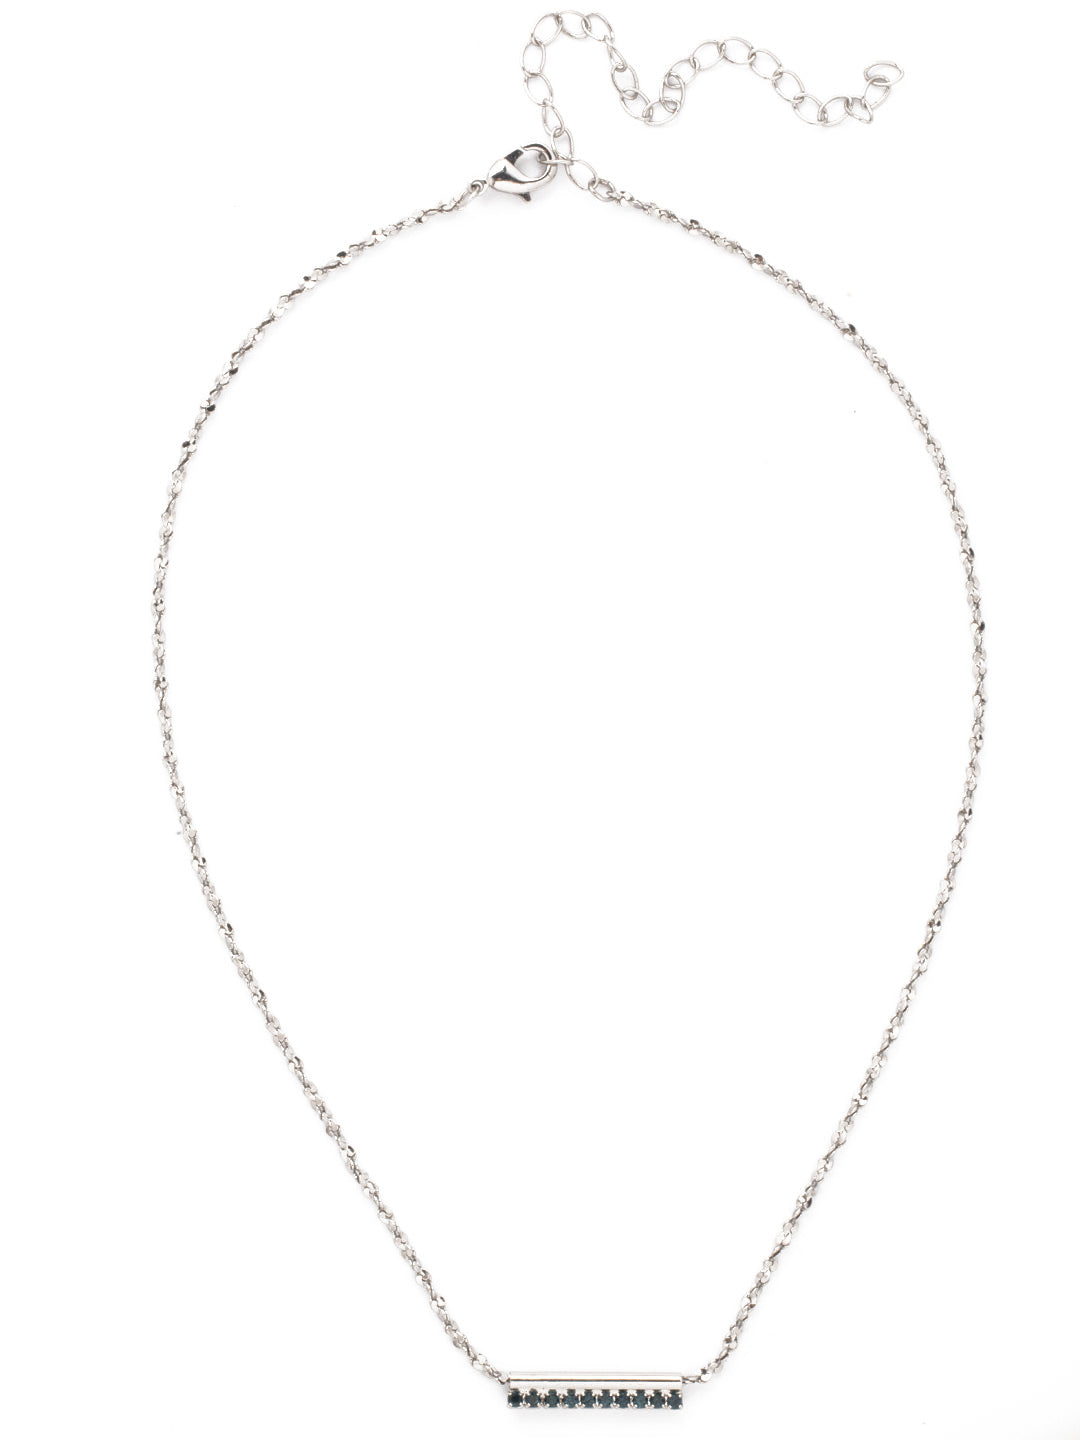 Rosamund Tennis Necklace - NFL7PDASP - <p>The Rosamund Tennis Necklace features a dainty crystal-embellished metal bar on an adjustable chain, secured with a lobster claw clasp. From Sorrelli's Aspen SKY collection in our Palladium finish.</p>